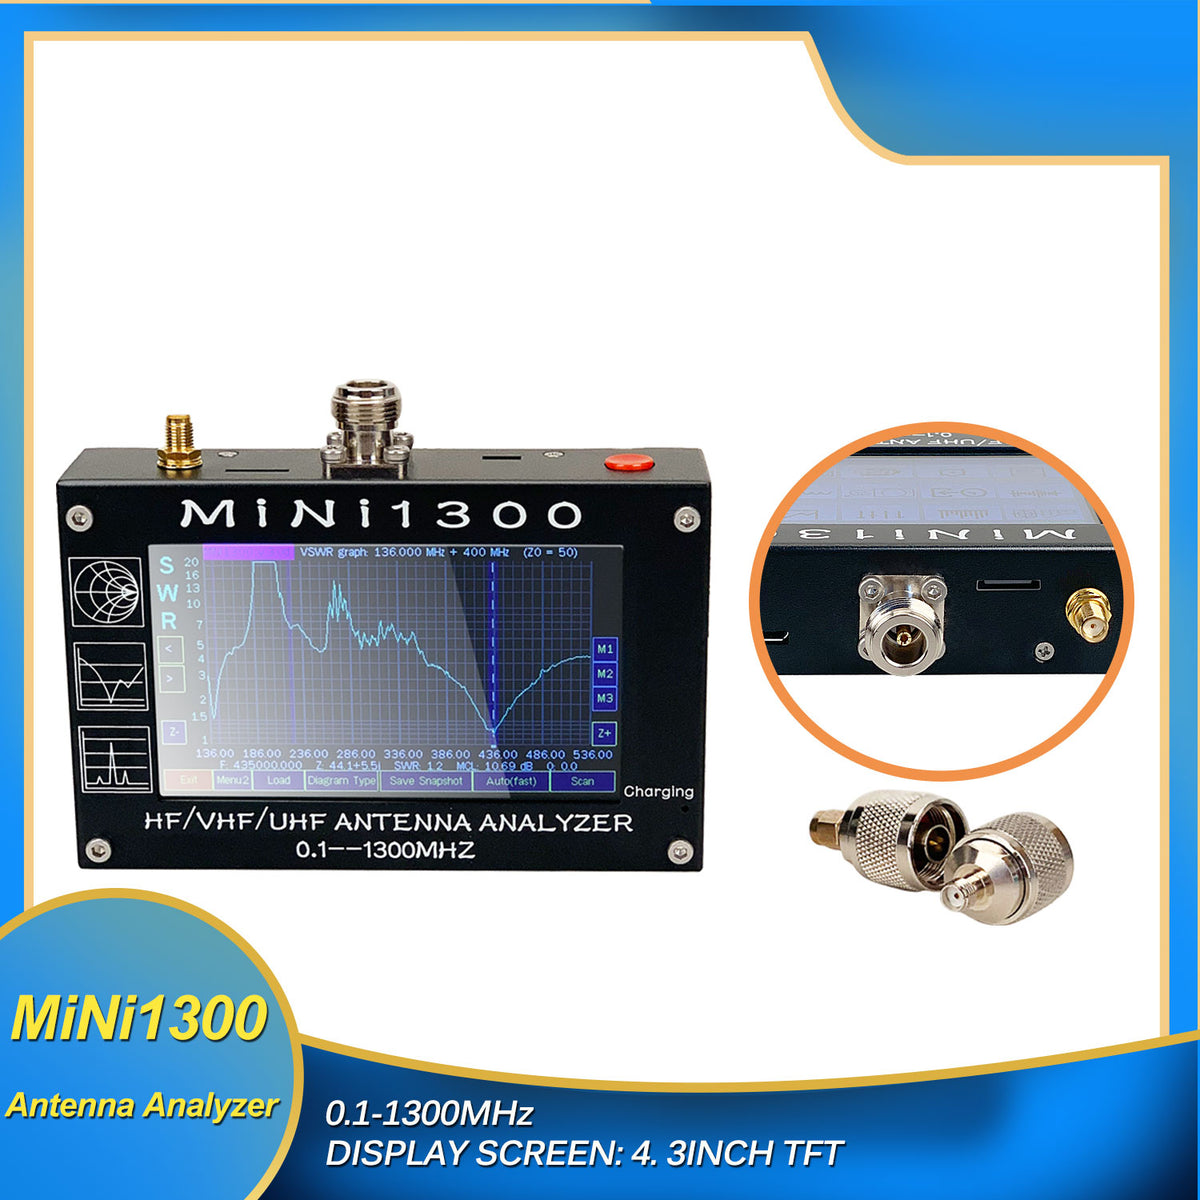 Details about   Mini1300 HF/VHF/UHF Antenna Analyzer 0.1-1300MHz 4.3" TFT LCD Touch  Screen US 